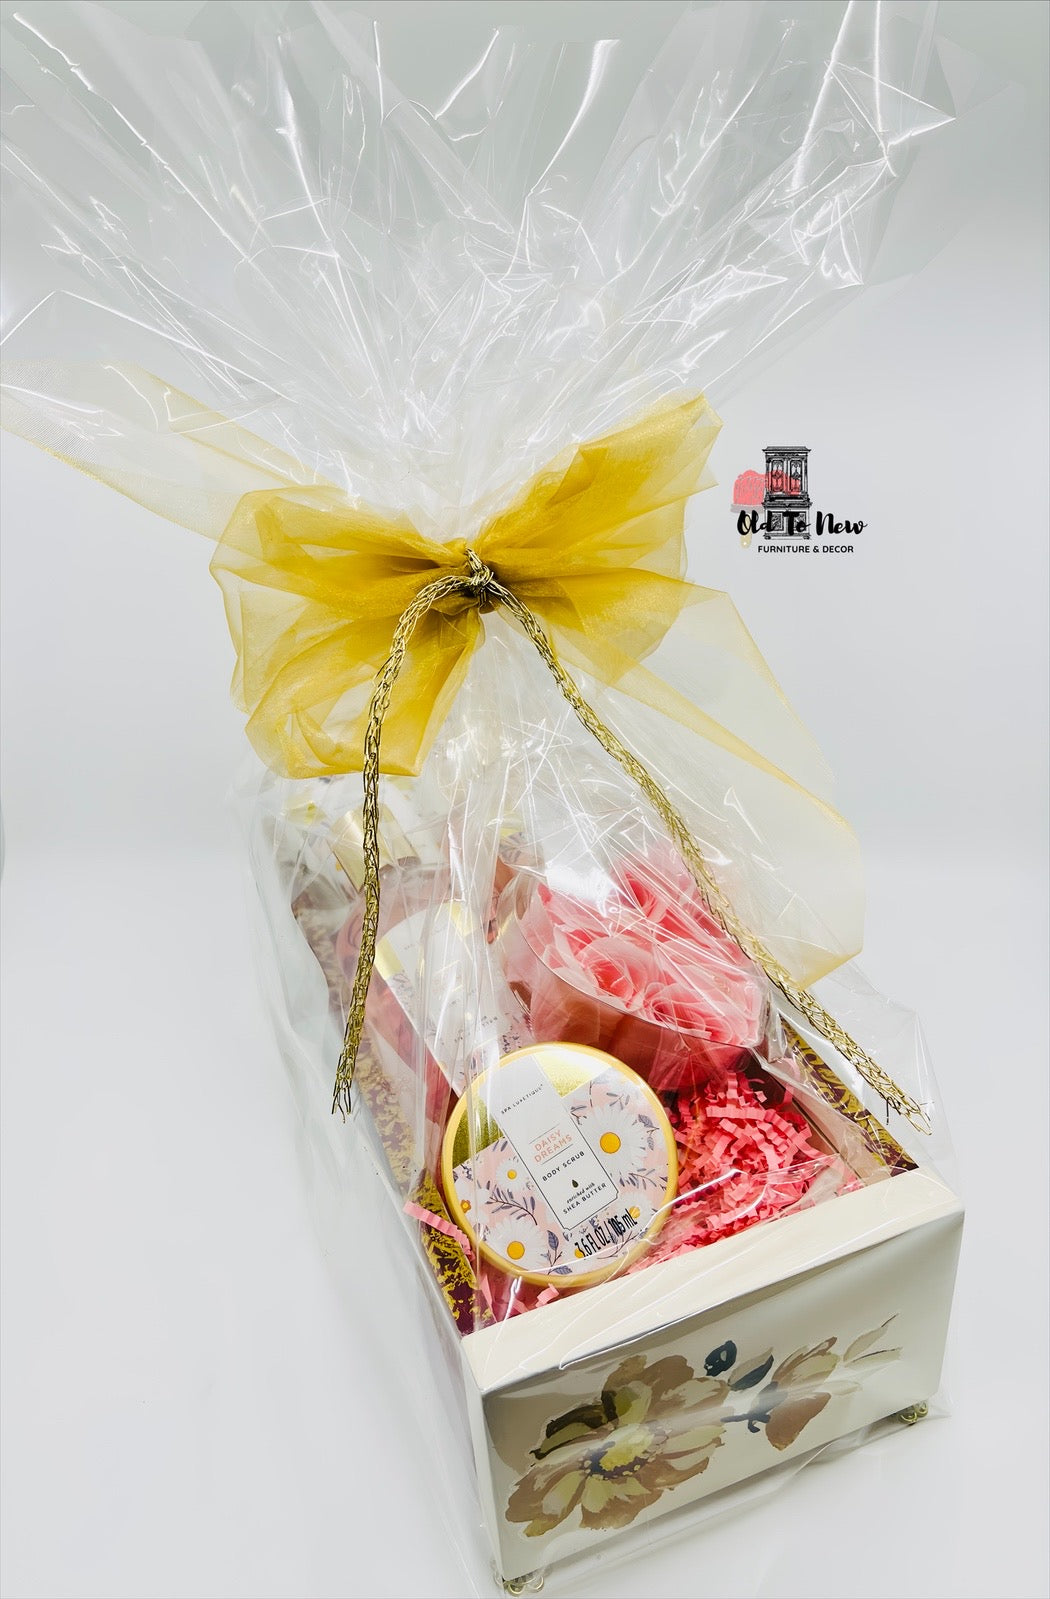 Gift Basket Spa Set, Spa Gift Box, Old to New Furniture & Decor, Get Well Soon Gift, Mothers Day Gift, Anniversary Gift.